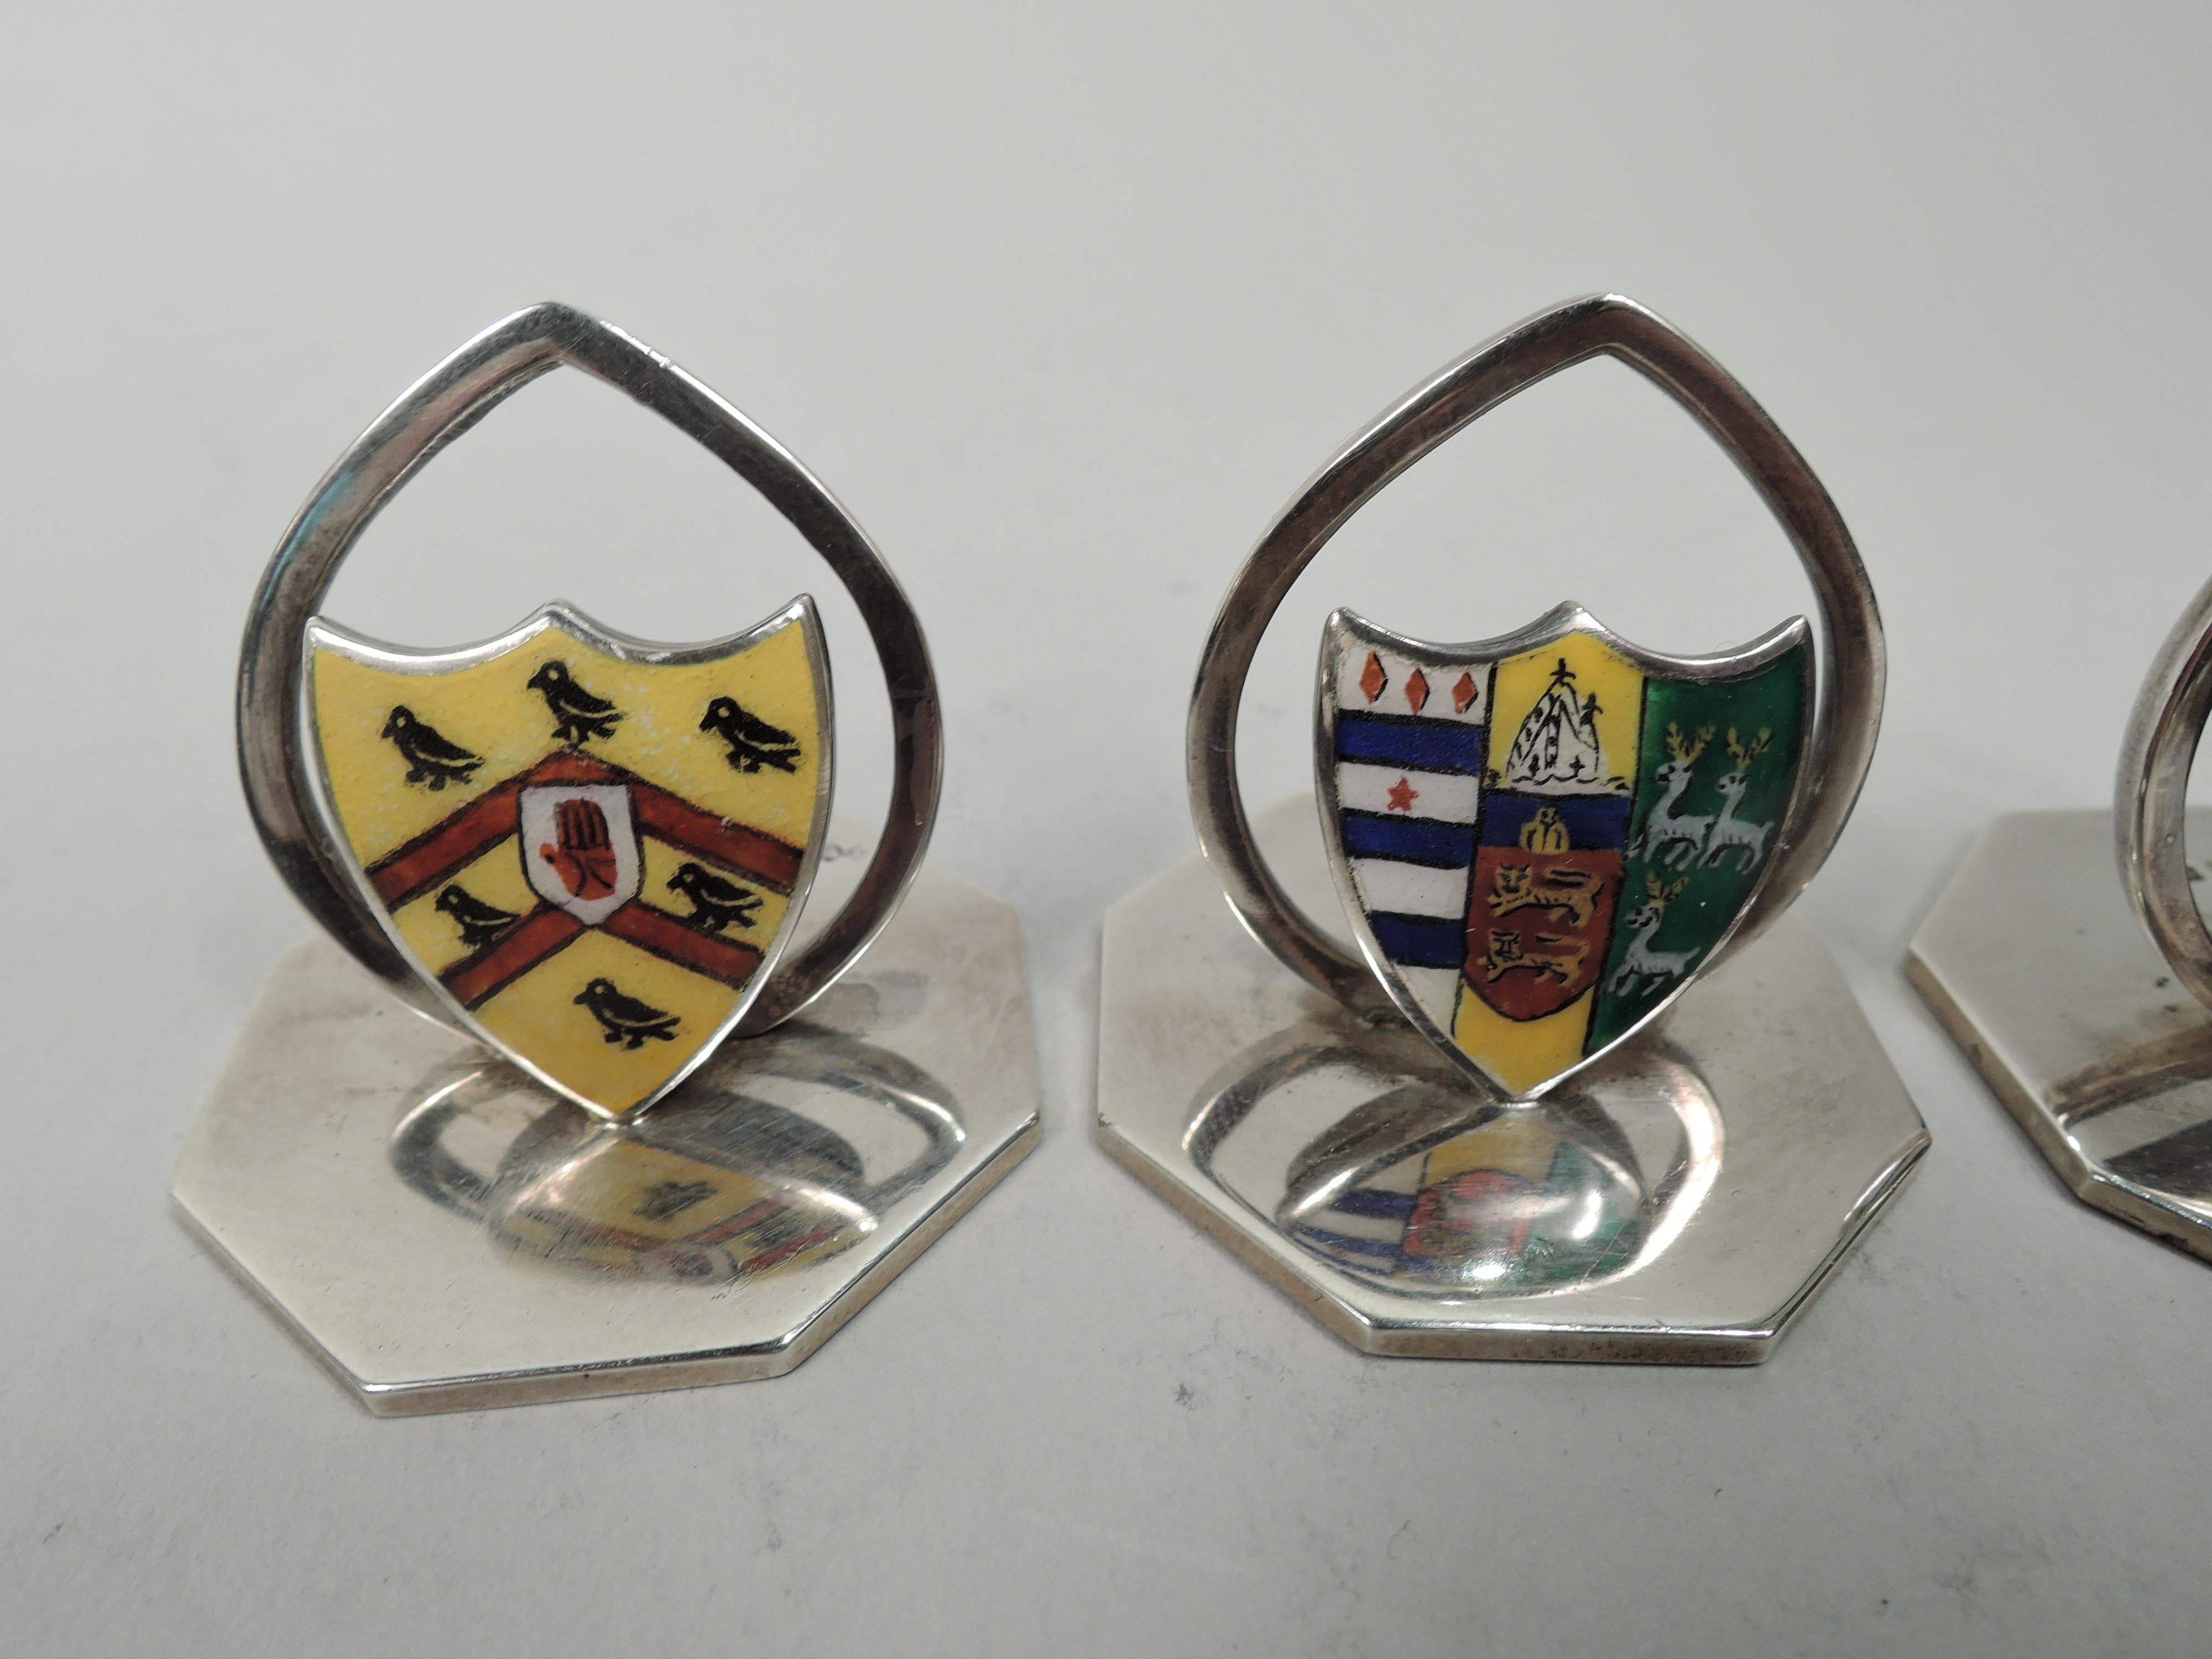 Set of 4 Edwardian sterling silver and enamel place card holders. Made by James William Benson in Birmingham, 1901 to 1902. Each: Enameled coat of arms and open oval clip mounted to flat octagonal base. Two each in two coats of arms. In